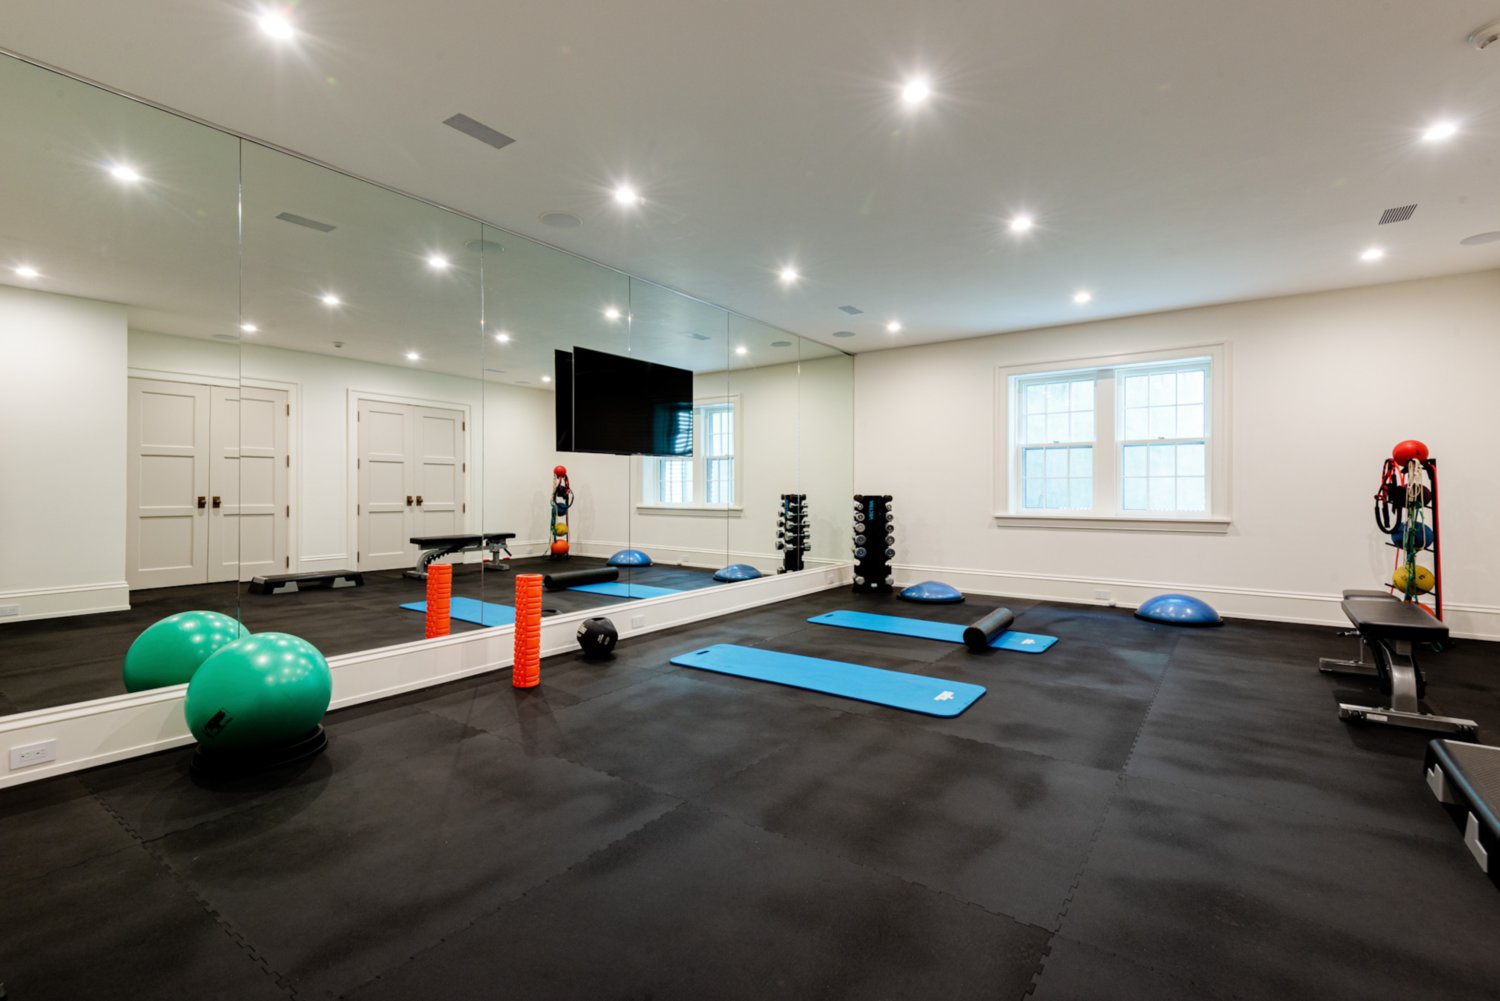 The lower-level gym space.